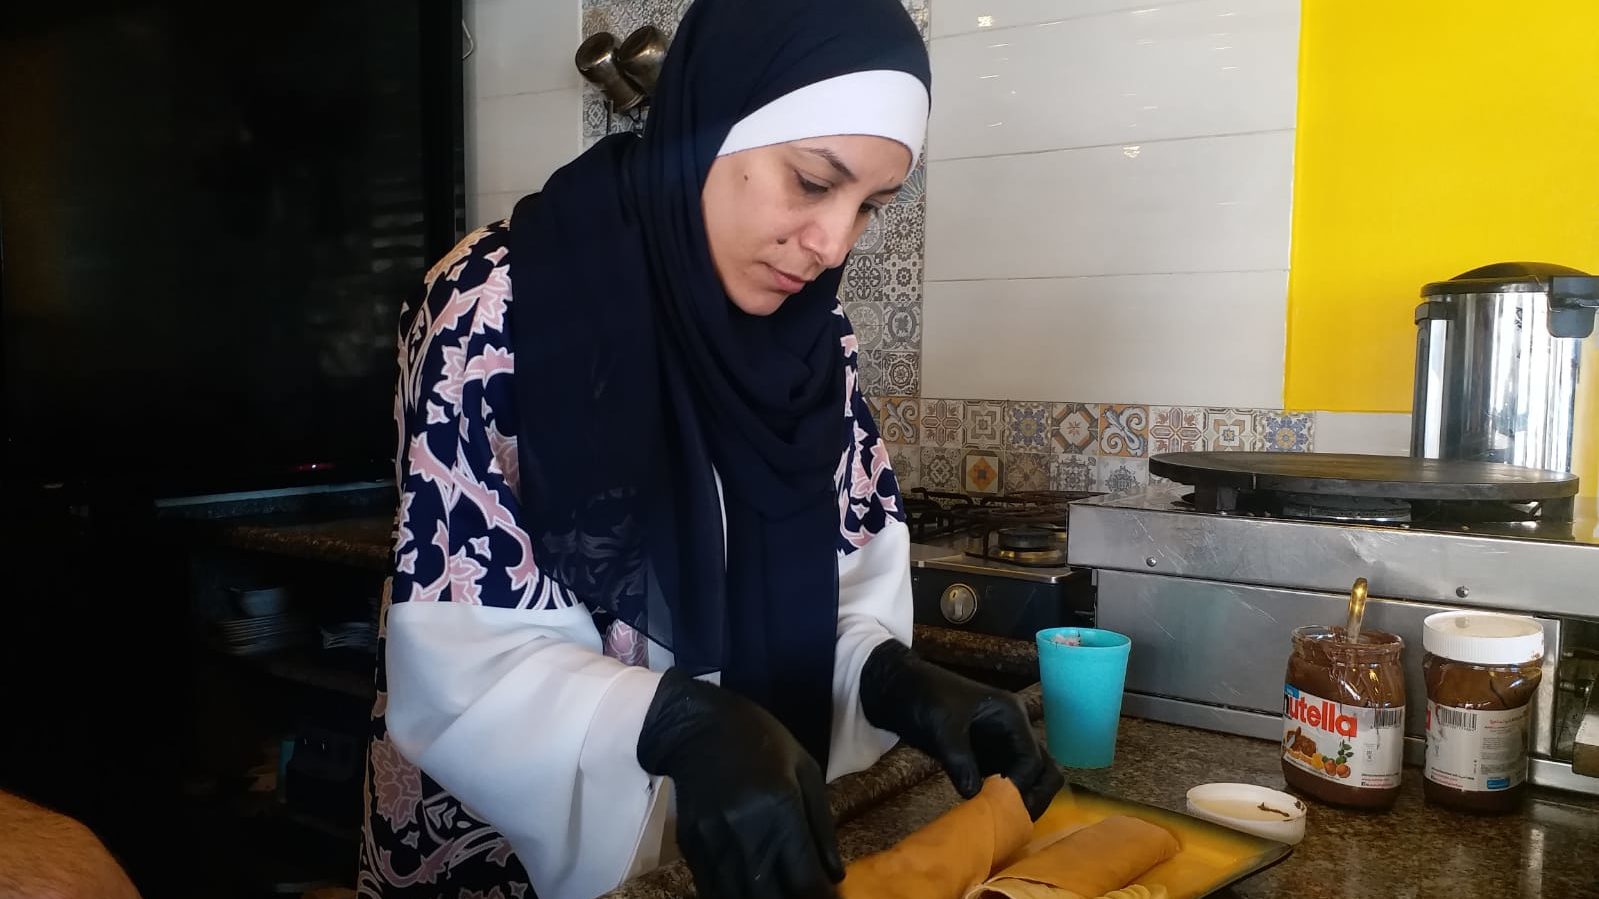 Gazan Women Go Entrepreneurial Amid Obstacles and COVID-19 (with VIDEO)